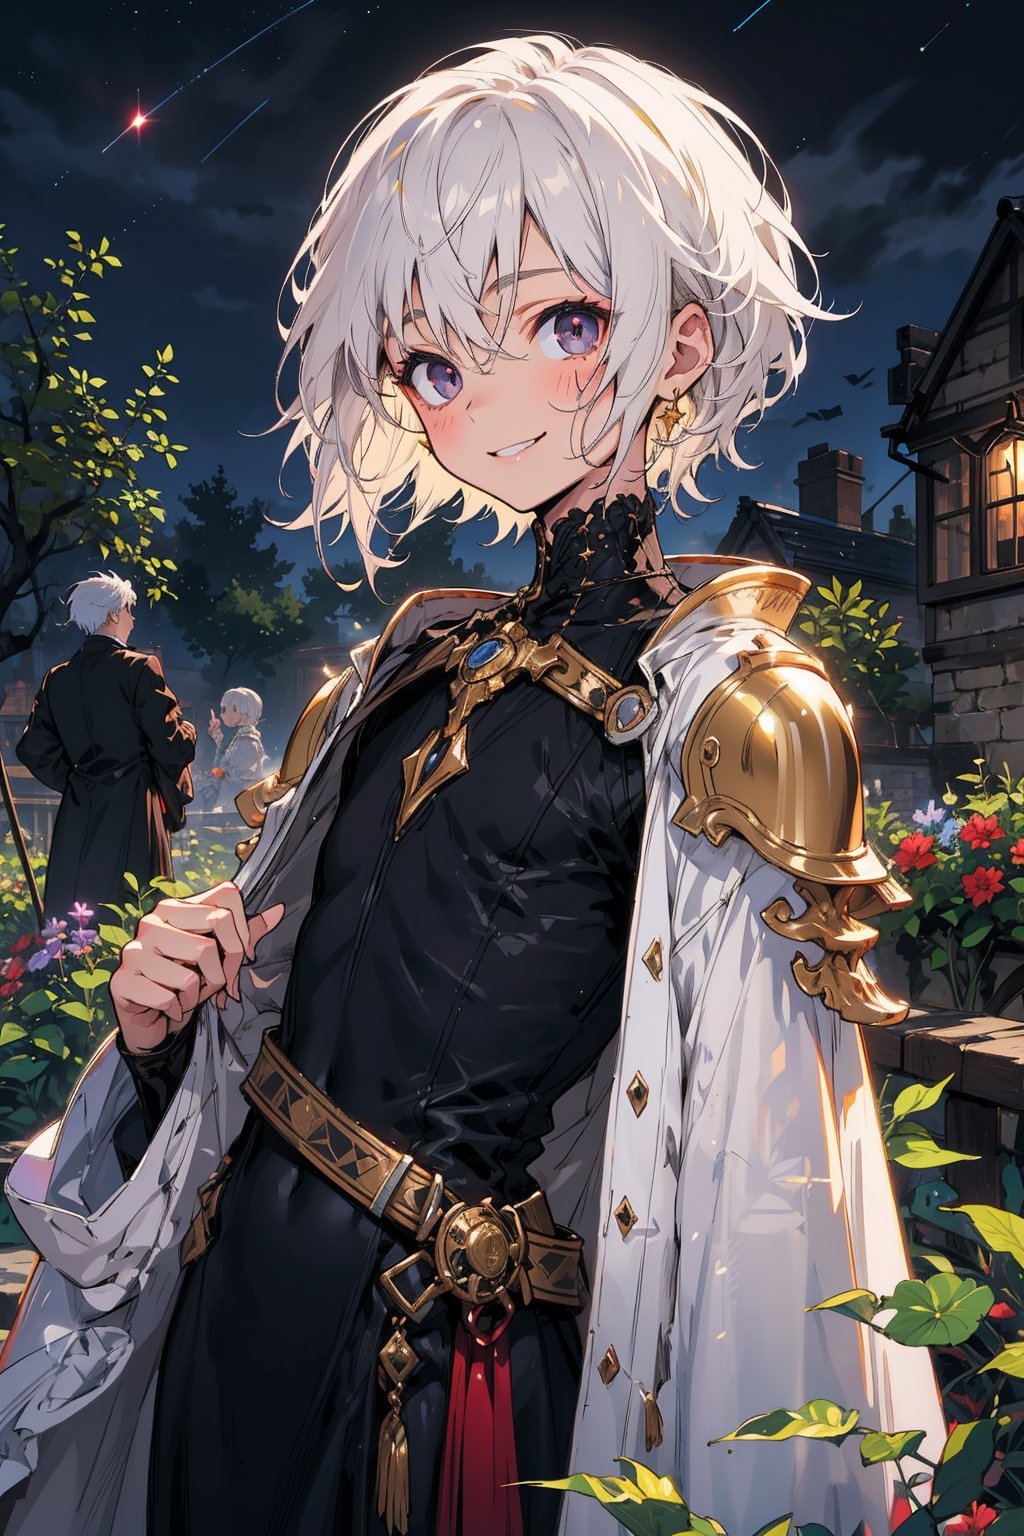 young_person, small_person, androgynous_look, flat_chest, white_hair, shoulder_length_hair, dark_eyes, uncertain_smile, very_slim, very_thin, close_up, fantasy_clothes, victorian_clothes, garden, night, dark_sky, small_body, white_robe, hermaphroditic_look, hermaphrodite, white_clothes, gold_marks, boyish_look, young_boy, tomboy